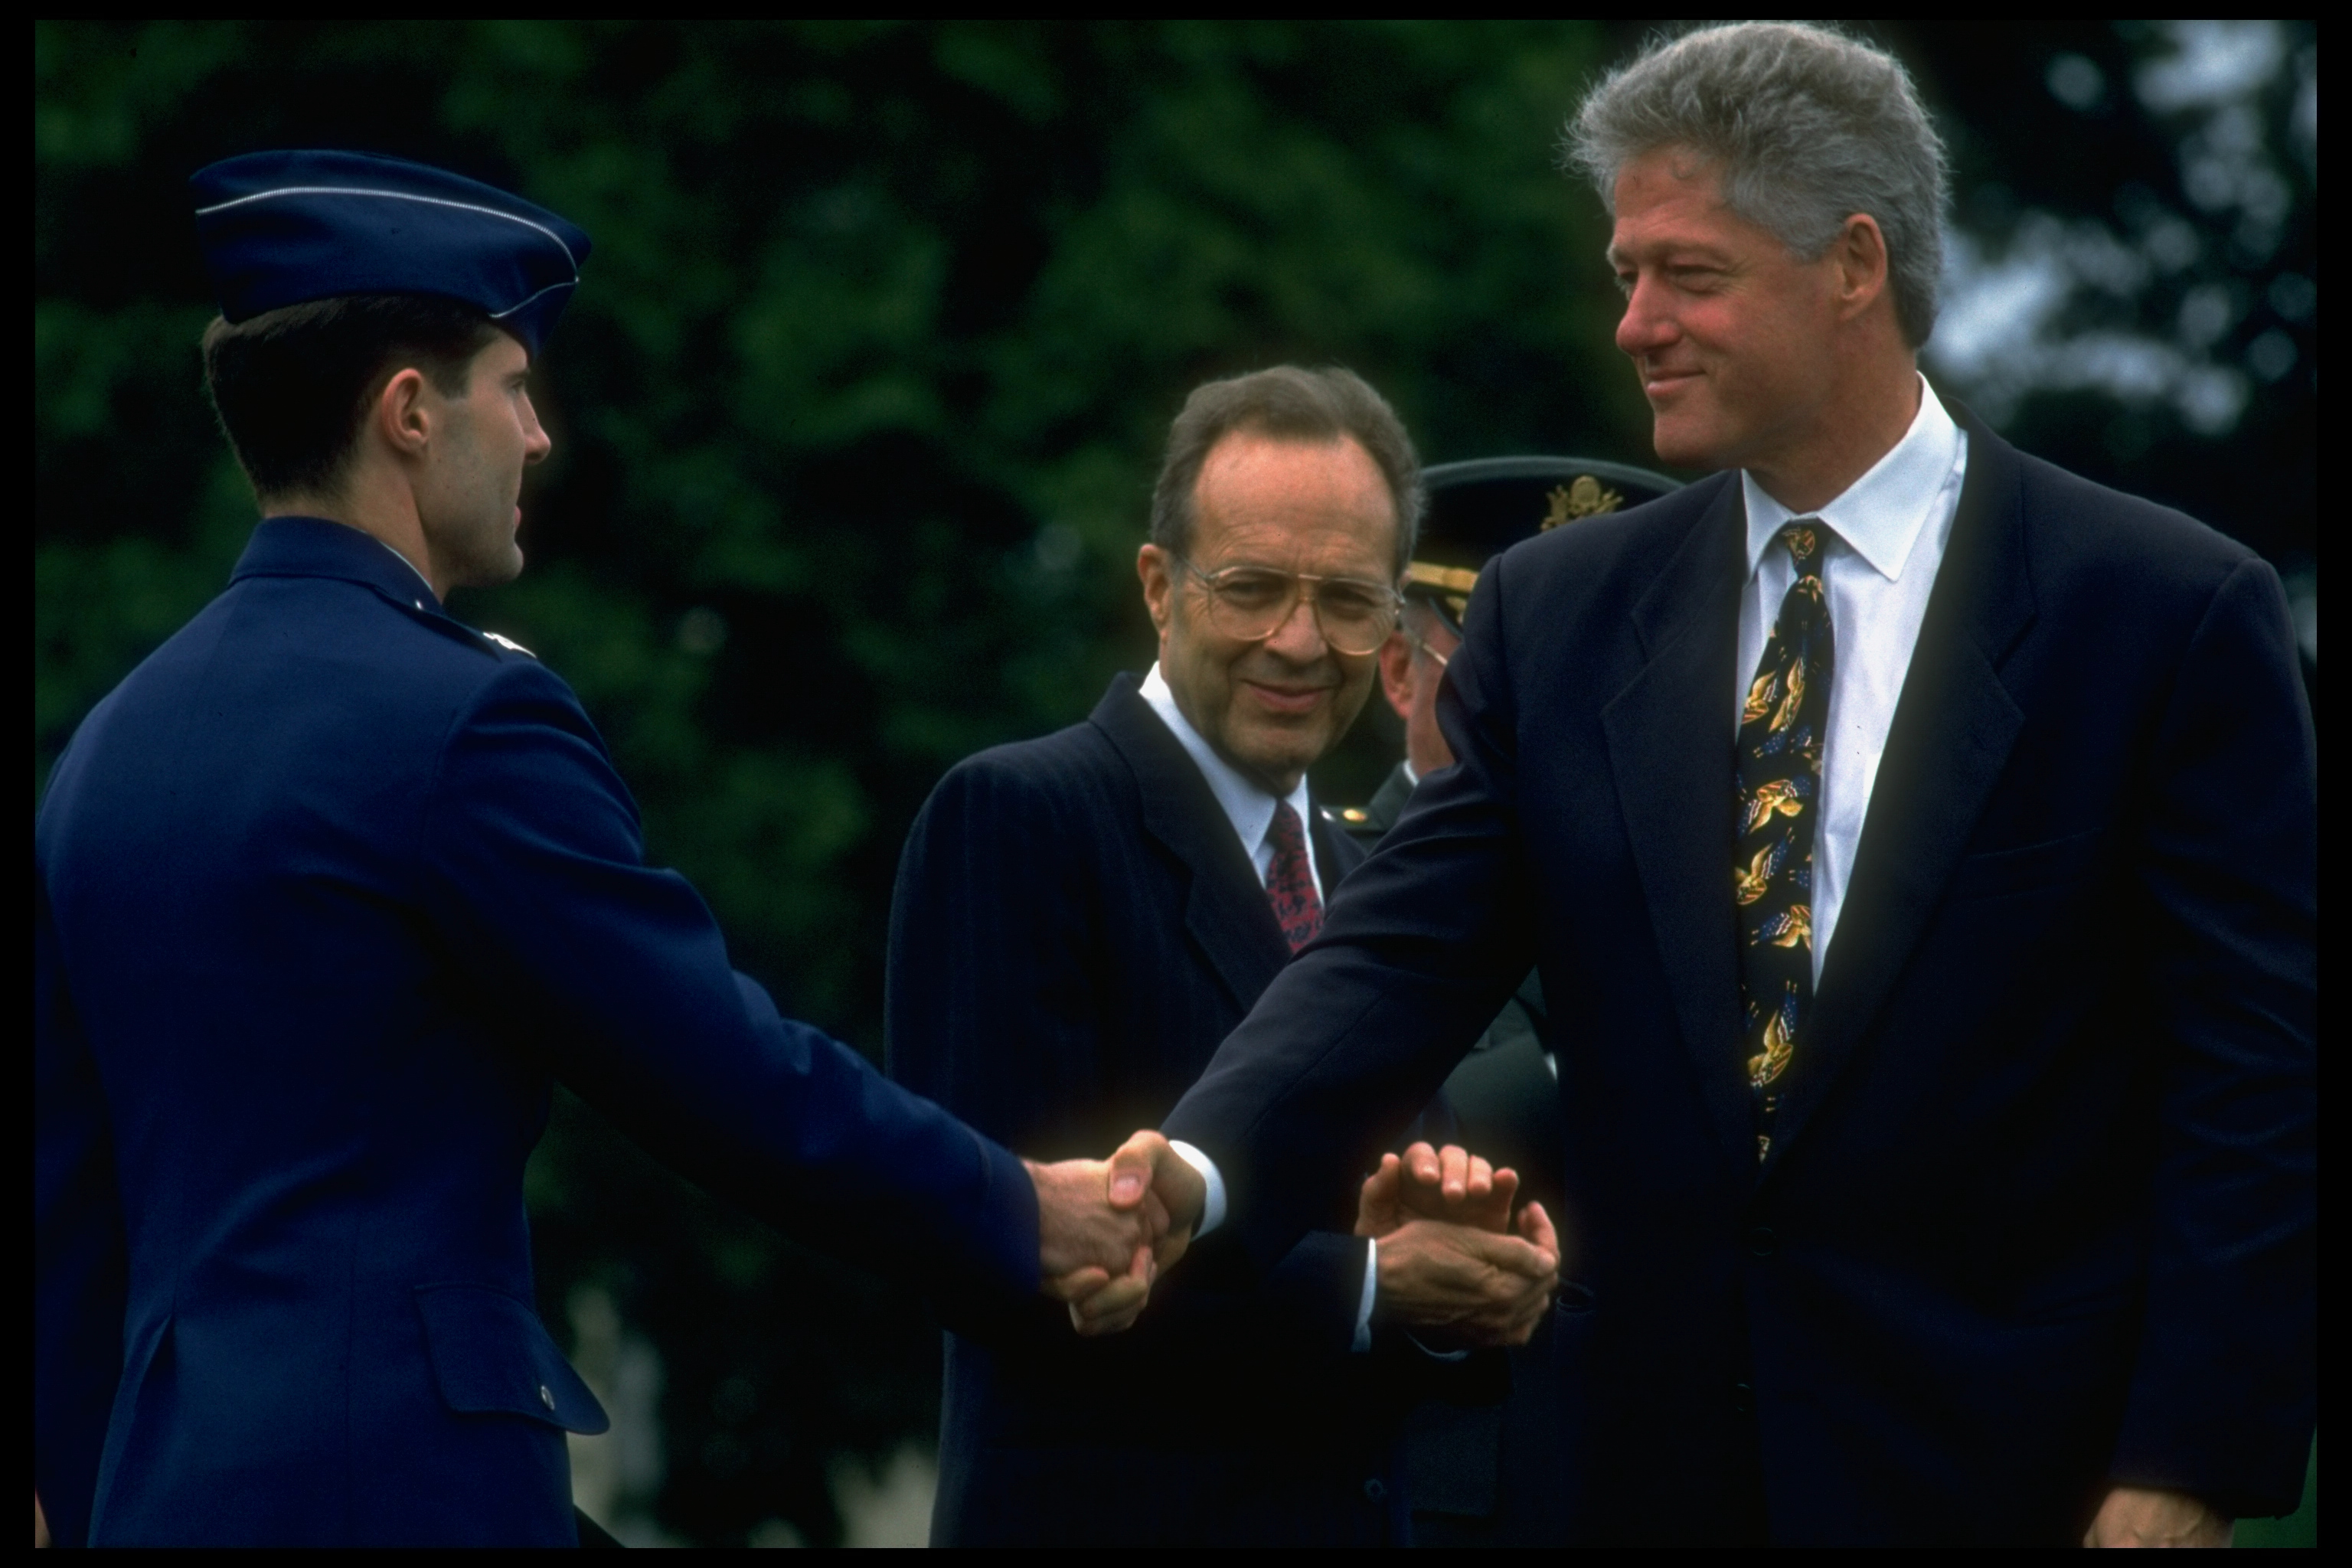 Scott O'Grady shaking hands with former U.S. President Bill Clinton in 1995. | Source: Getty Images